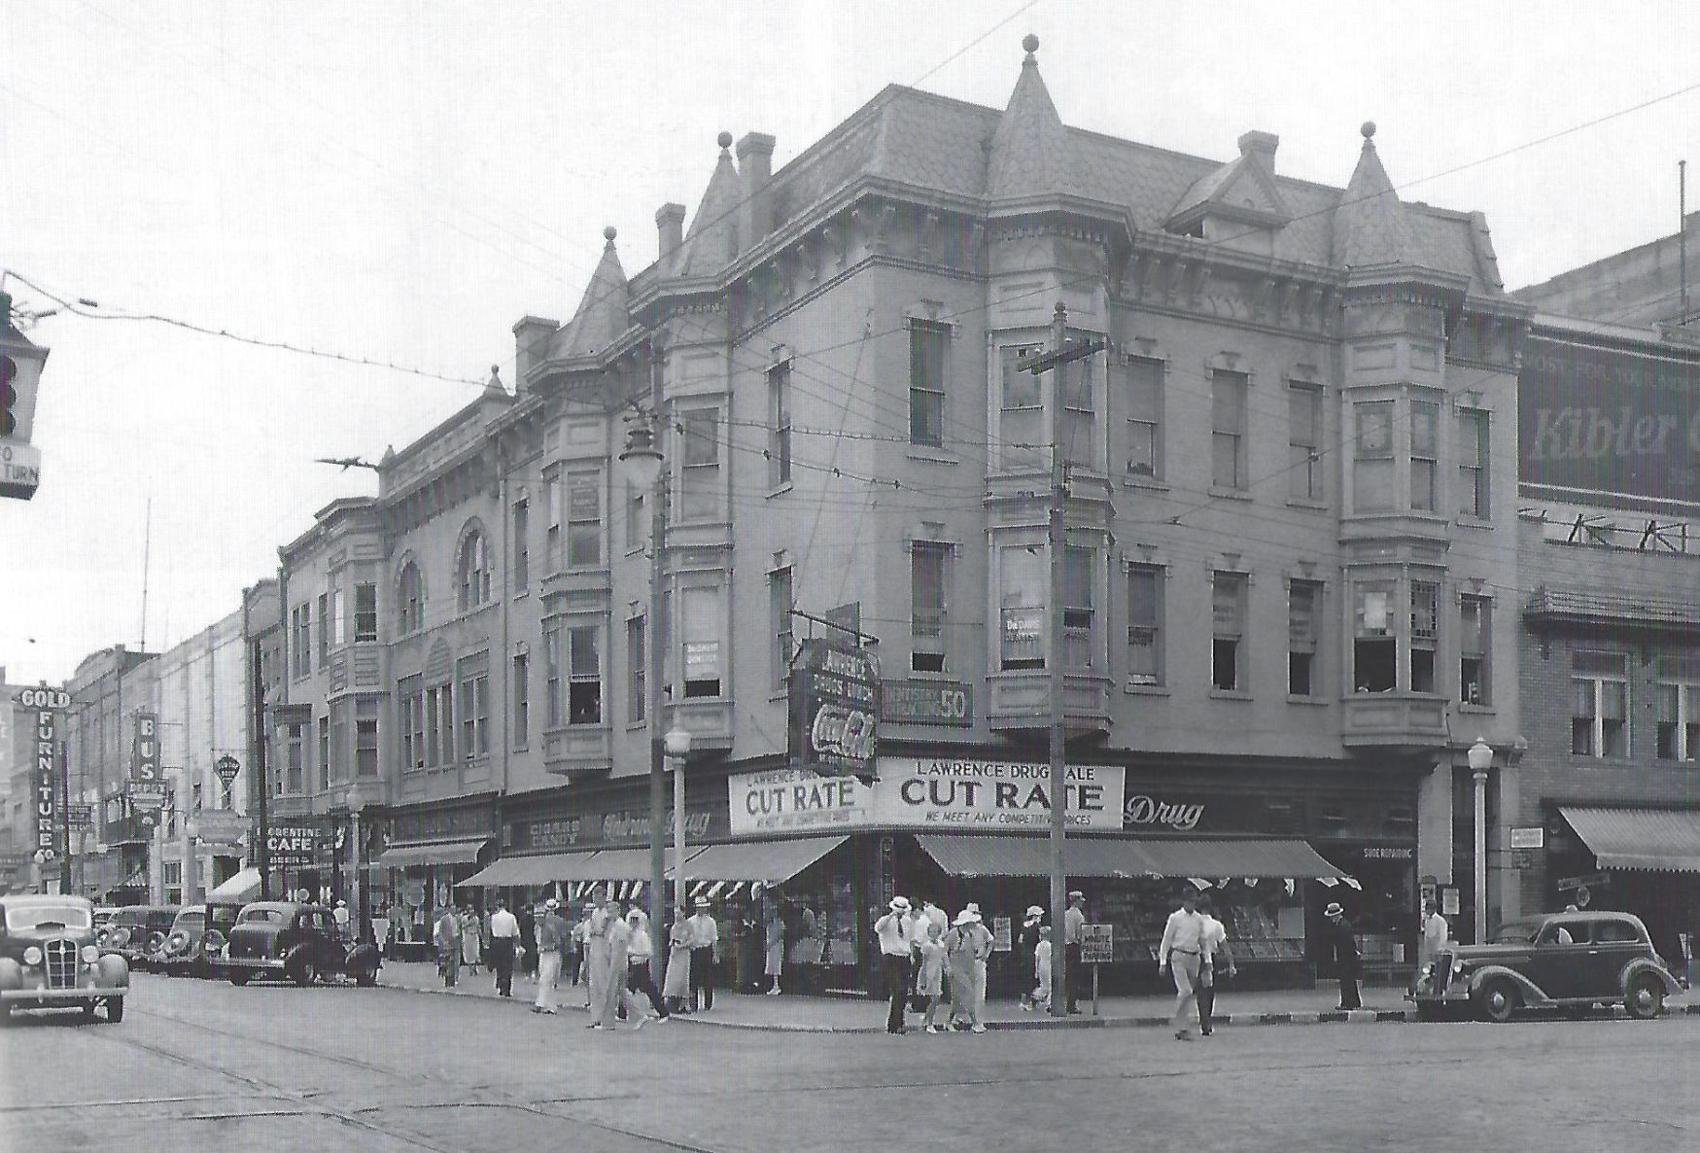 The Caldwell Building during the early 1930s